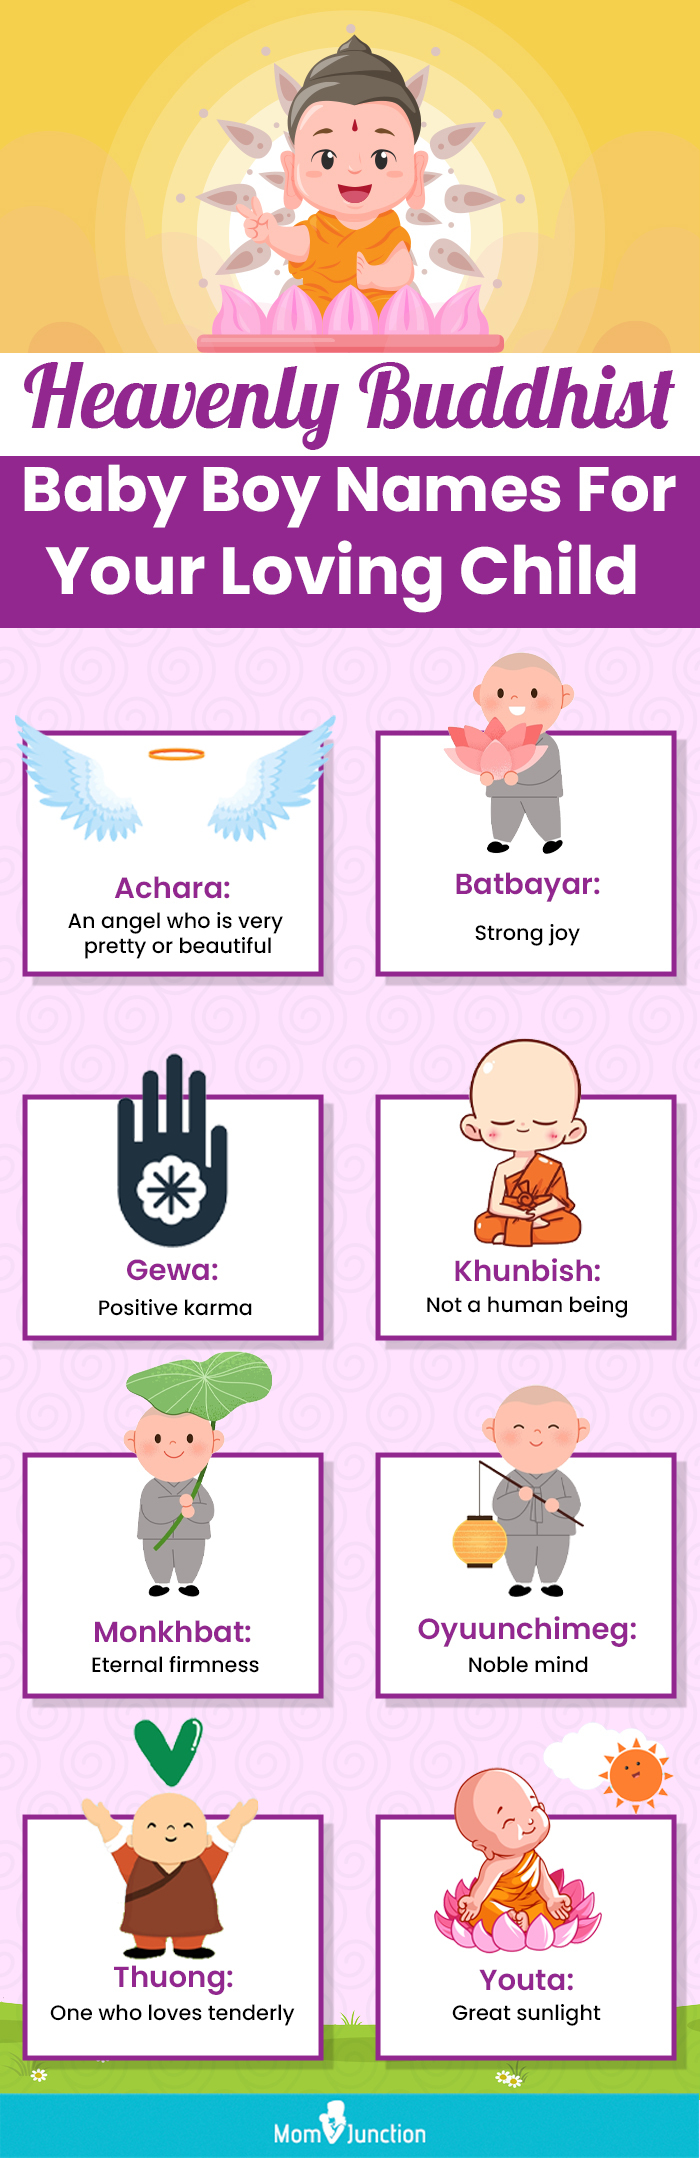 heavenly buddhist baby names for your loving child (infographic)